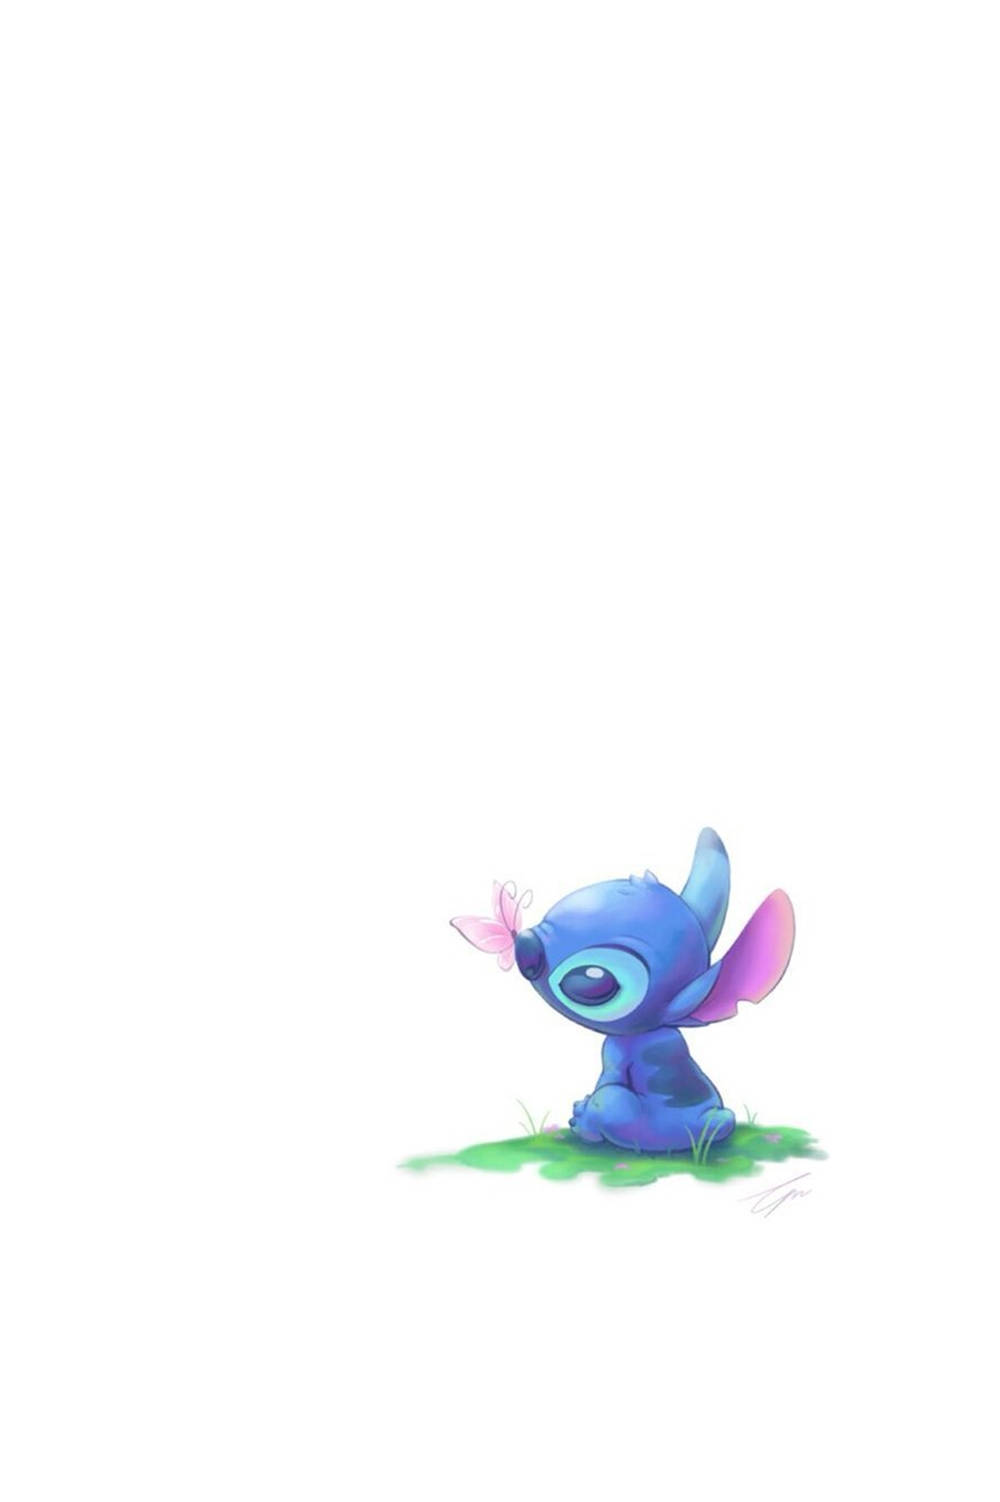 Cute Stitch With Butterfly Iphone